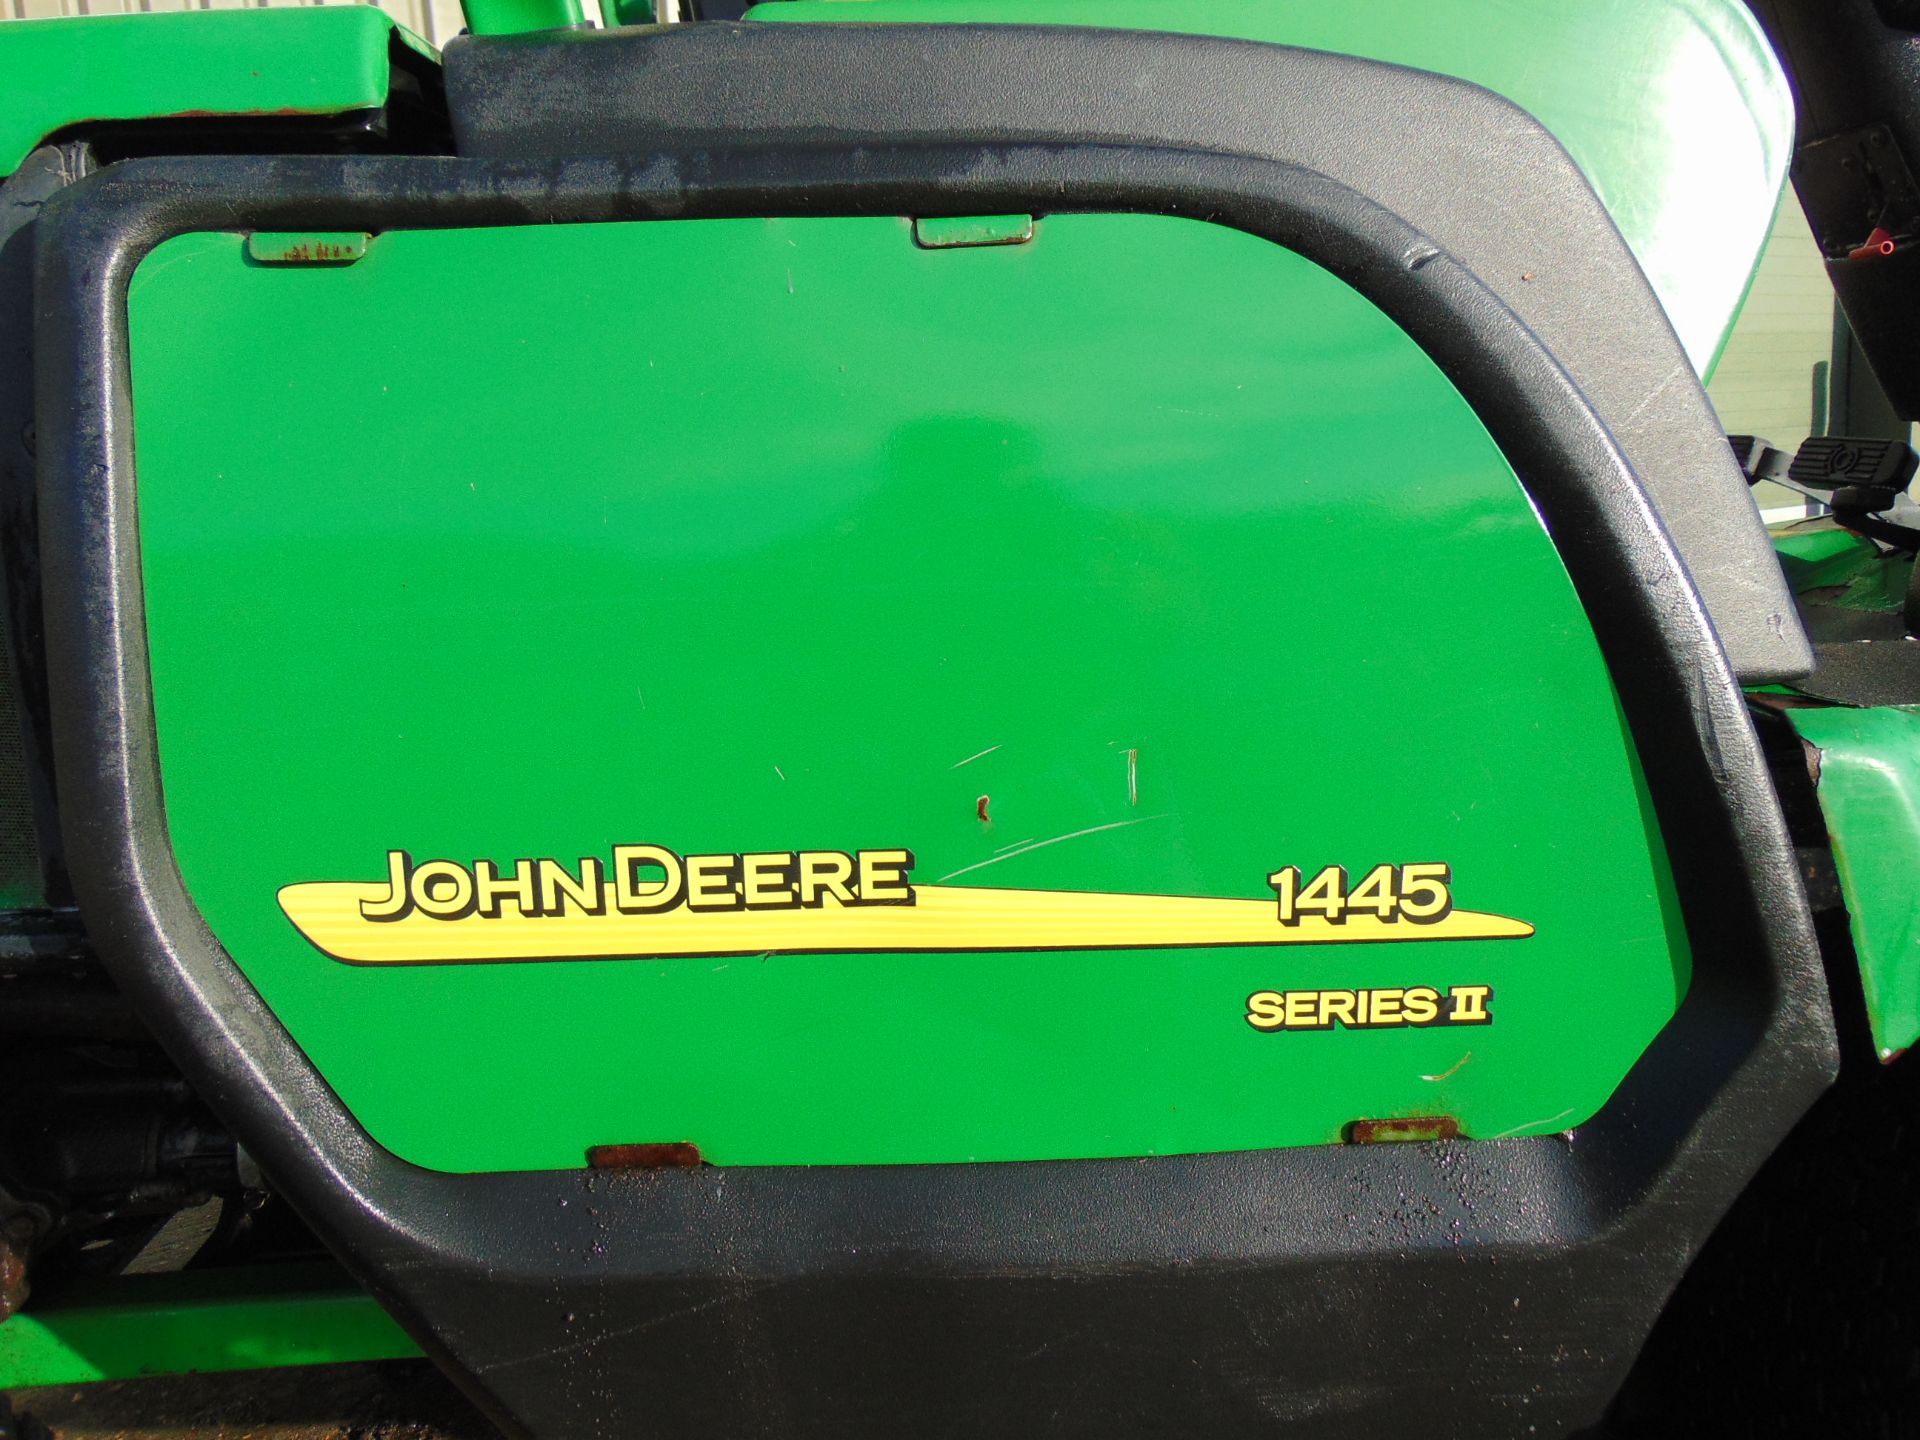 2009 John Deere 1445 Series II Ride On Mower C/W Fast Back Commercial 62 Cutting Deck 2473 HOURS! - Image 17 of 17